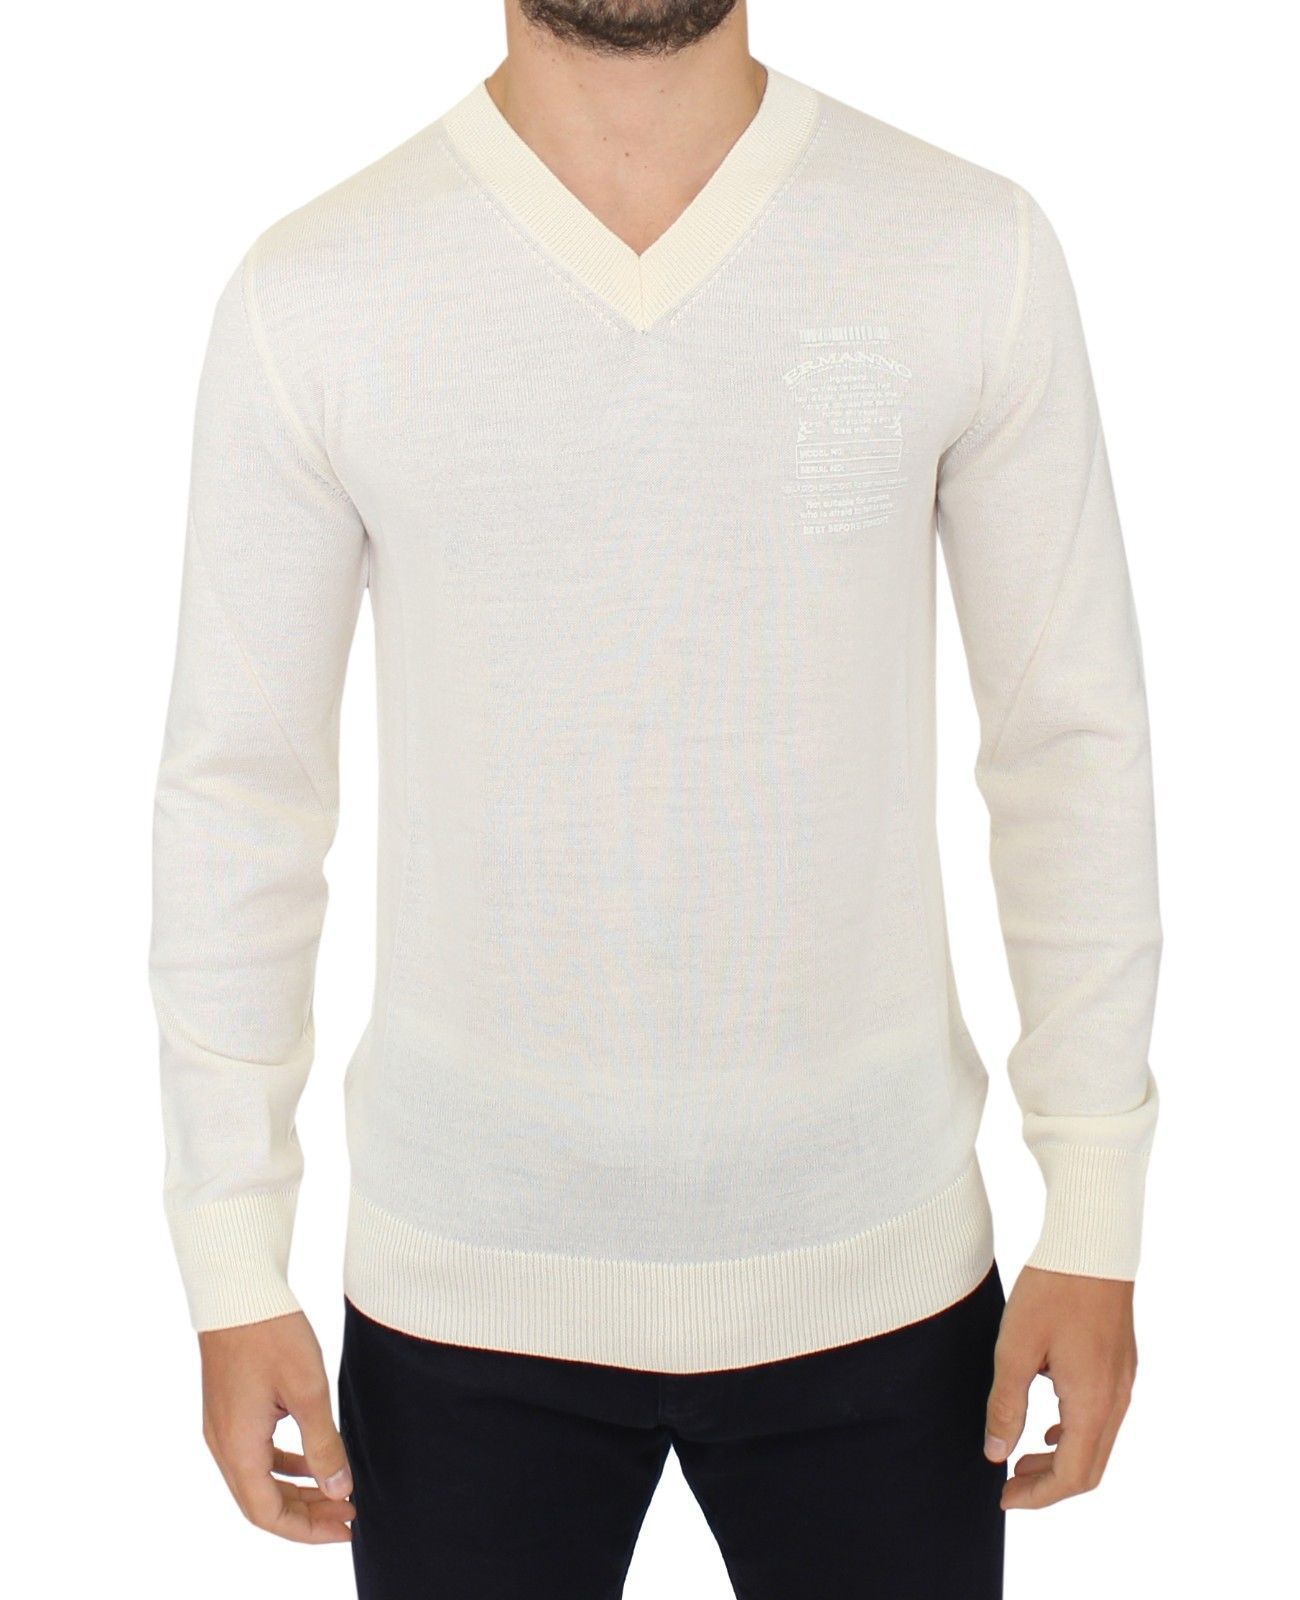 Off White Wool Blend V-neck Pullover Sweater - Sweaters